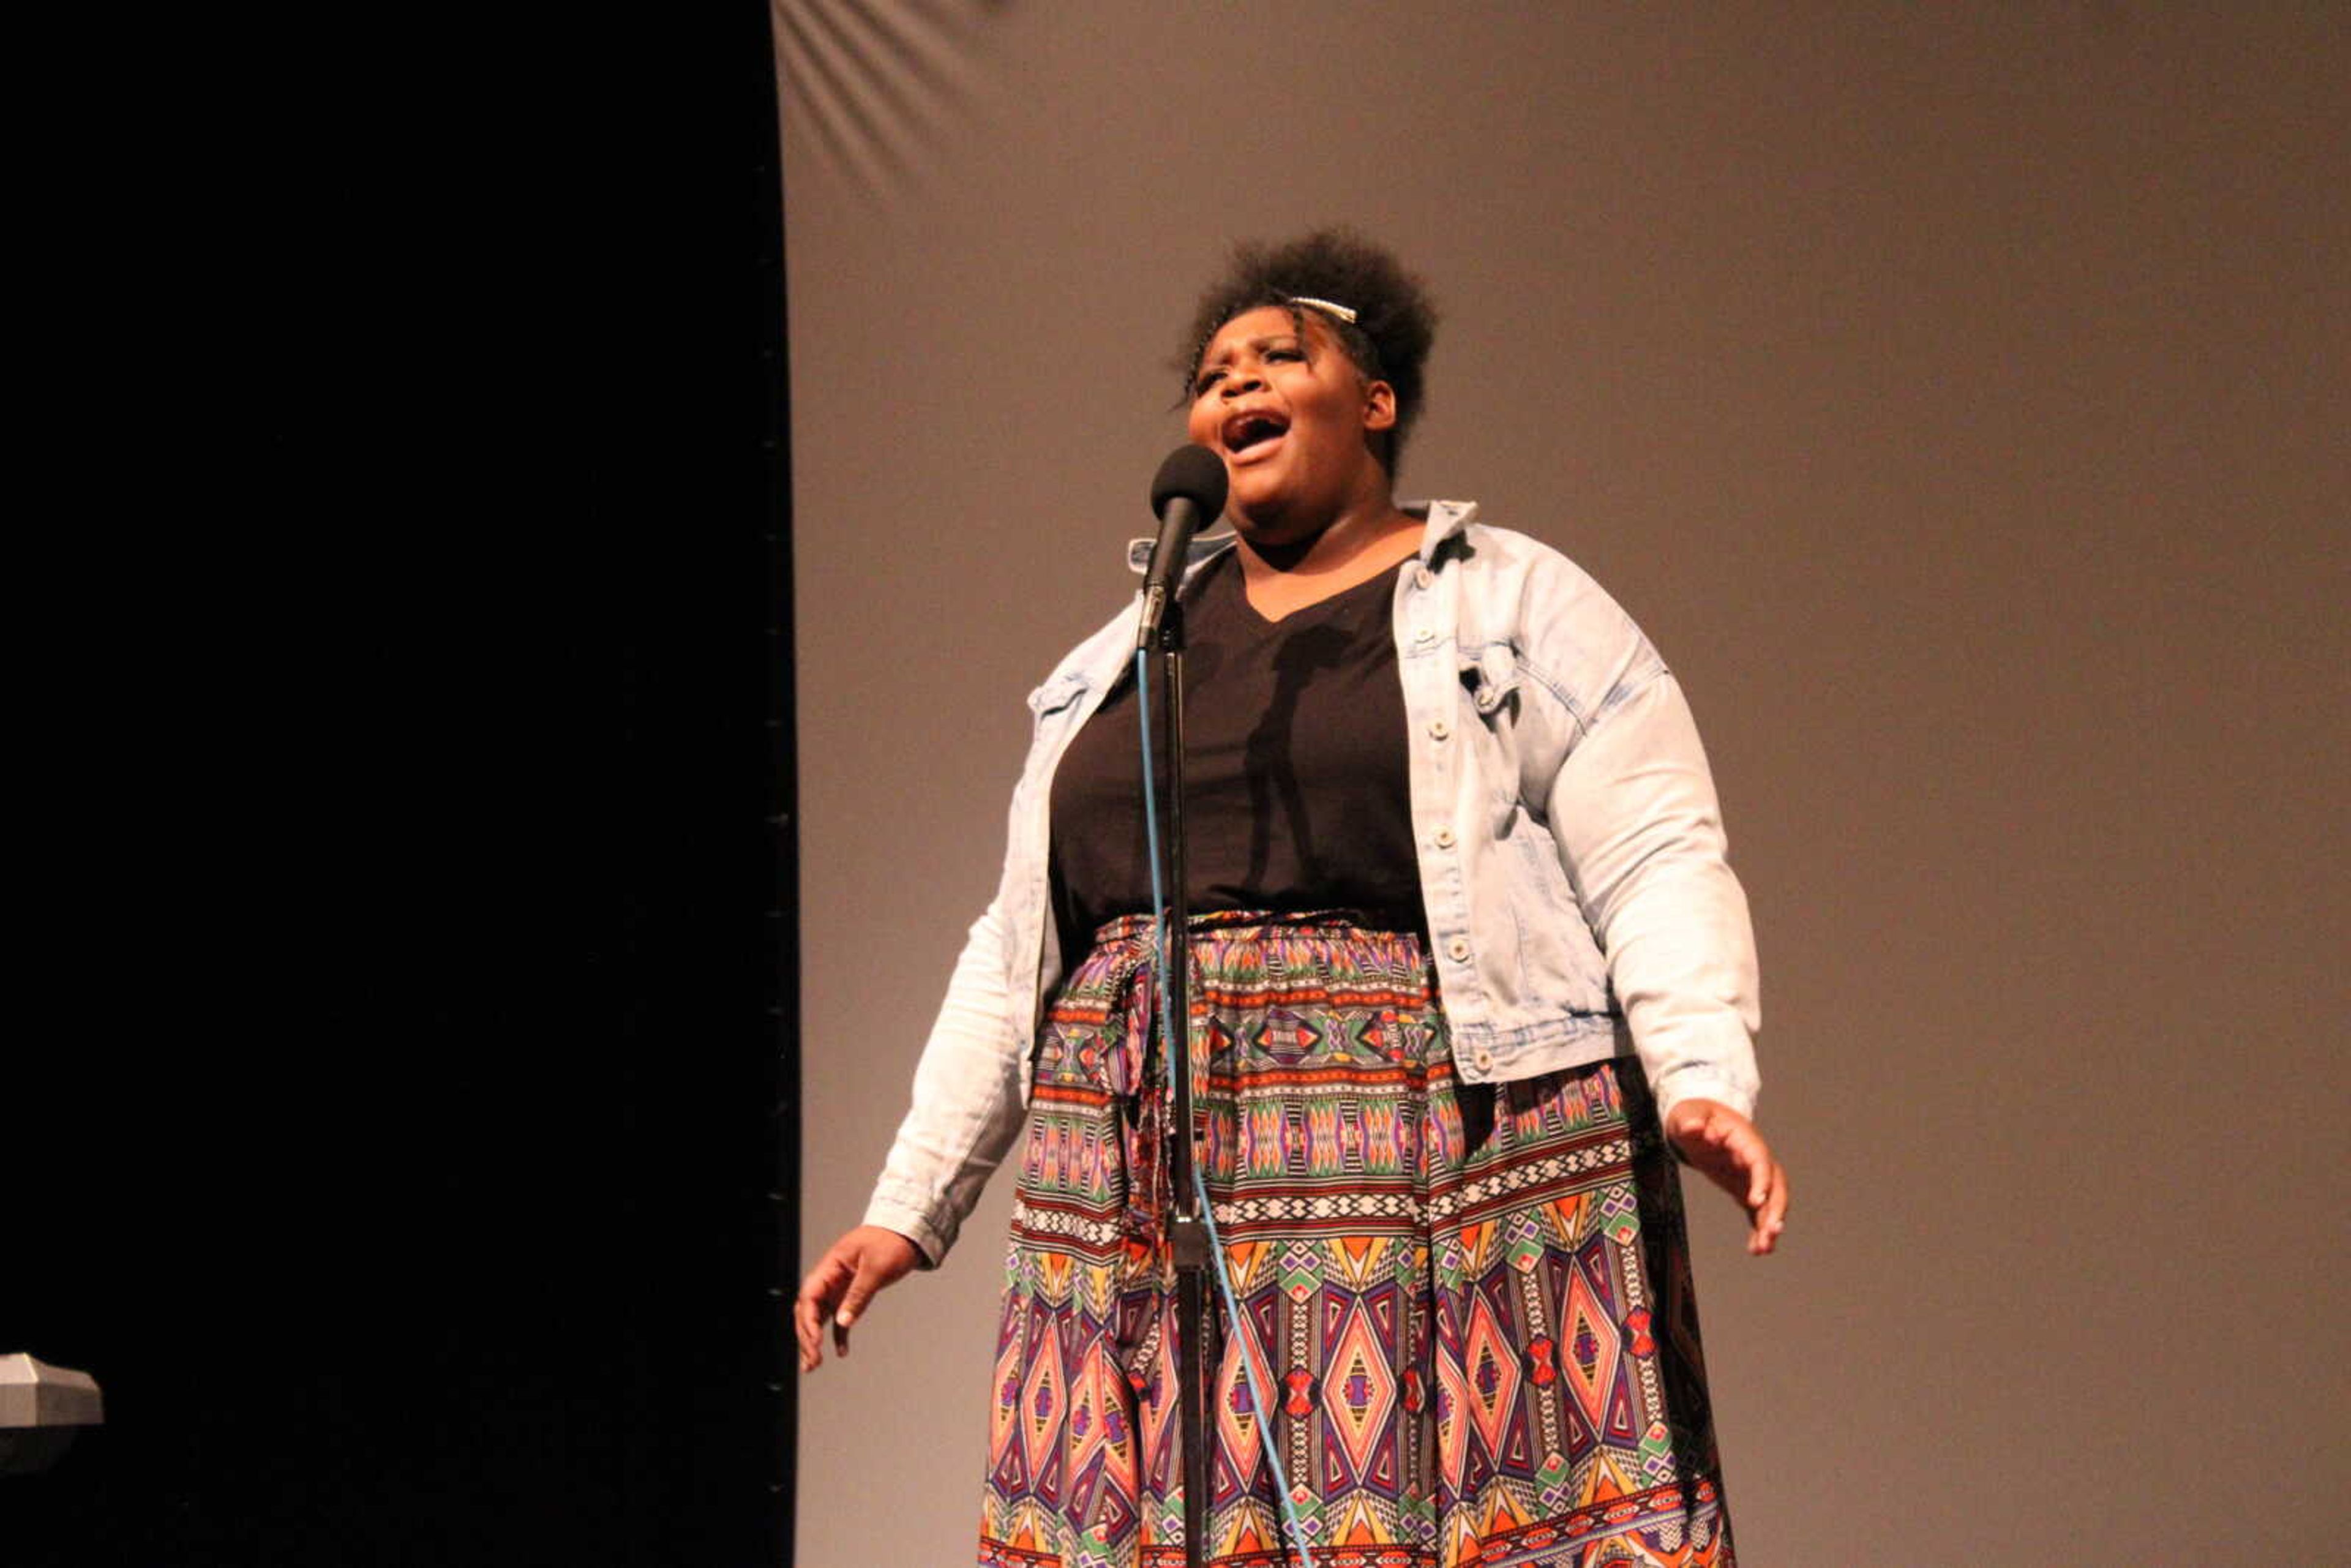 Kennedee Nash performs "I Know Where I've Been" from the musical Hairspray. Hairspray was the first musical that Nash saw that had someone look like her and that talked about race issues.